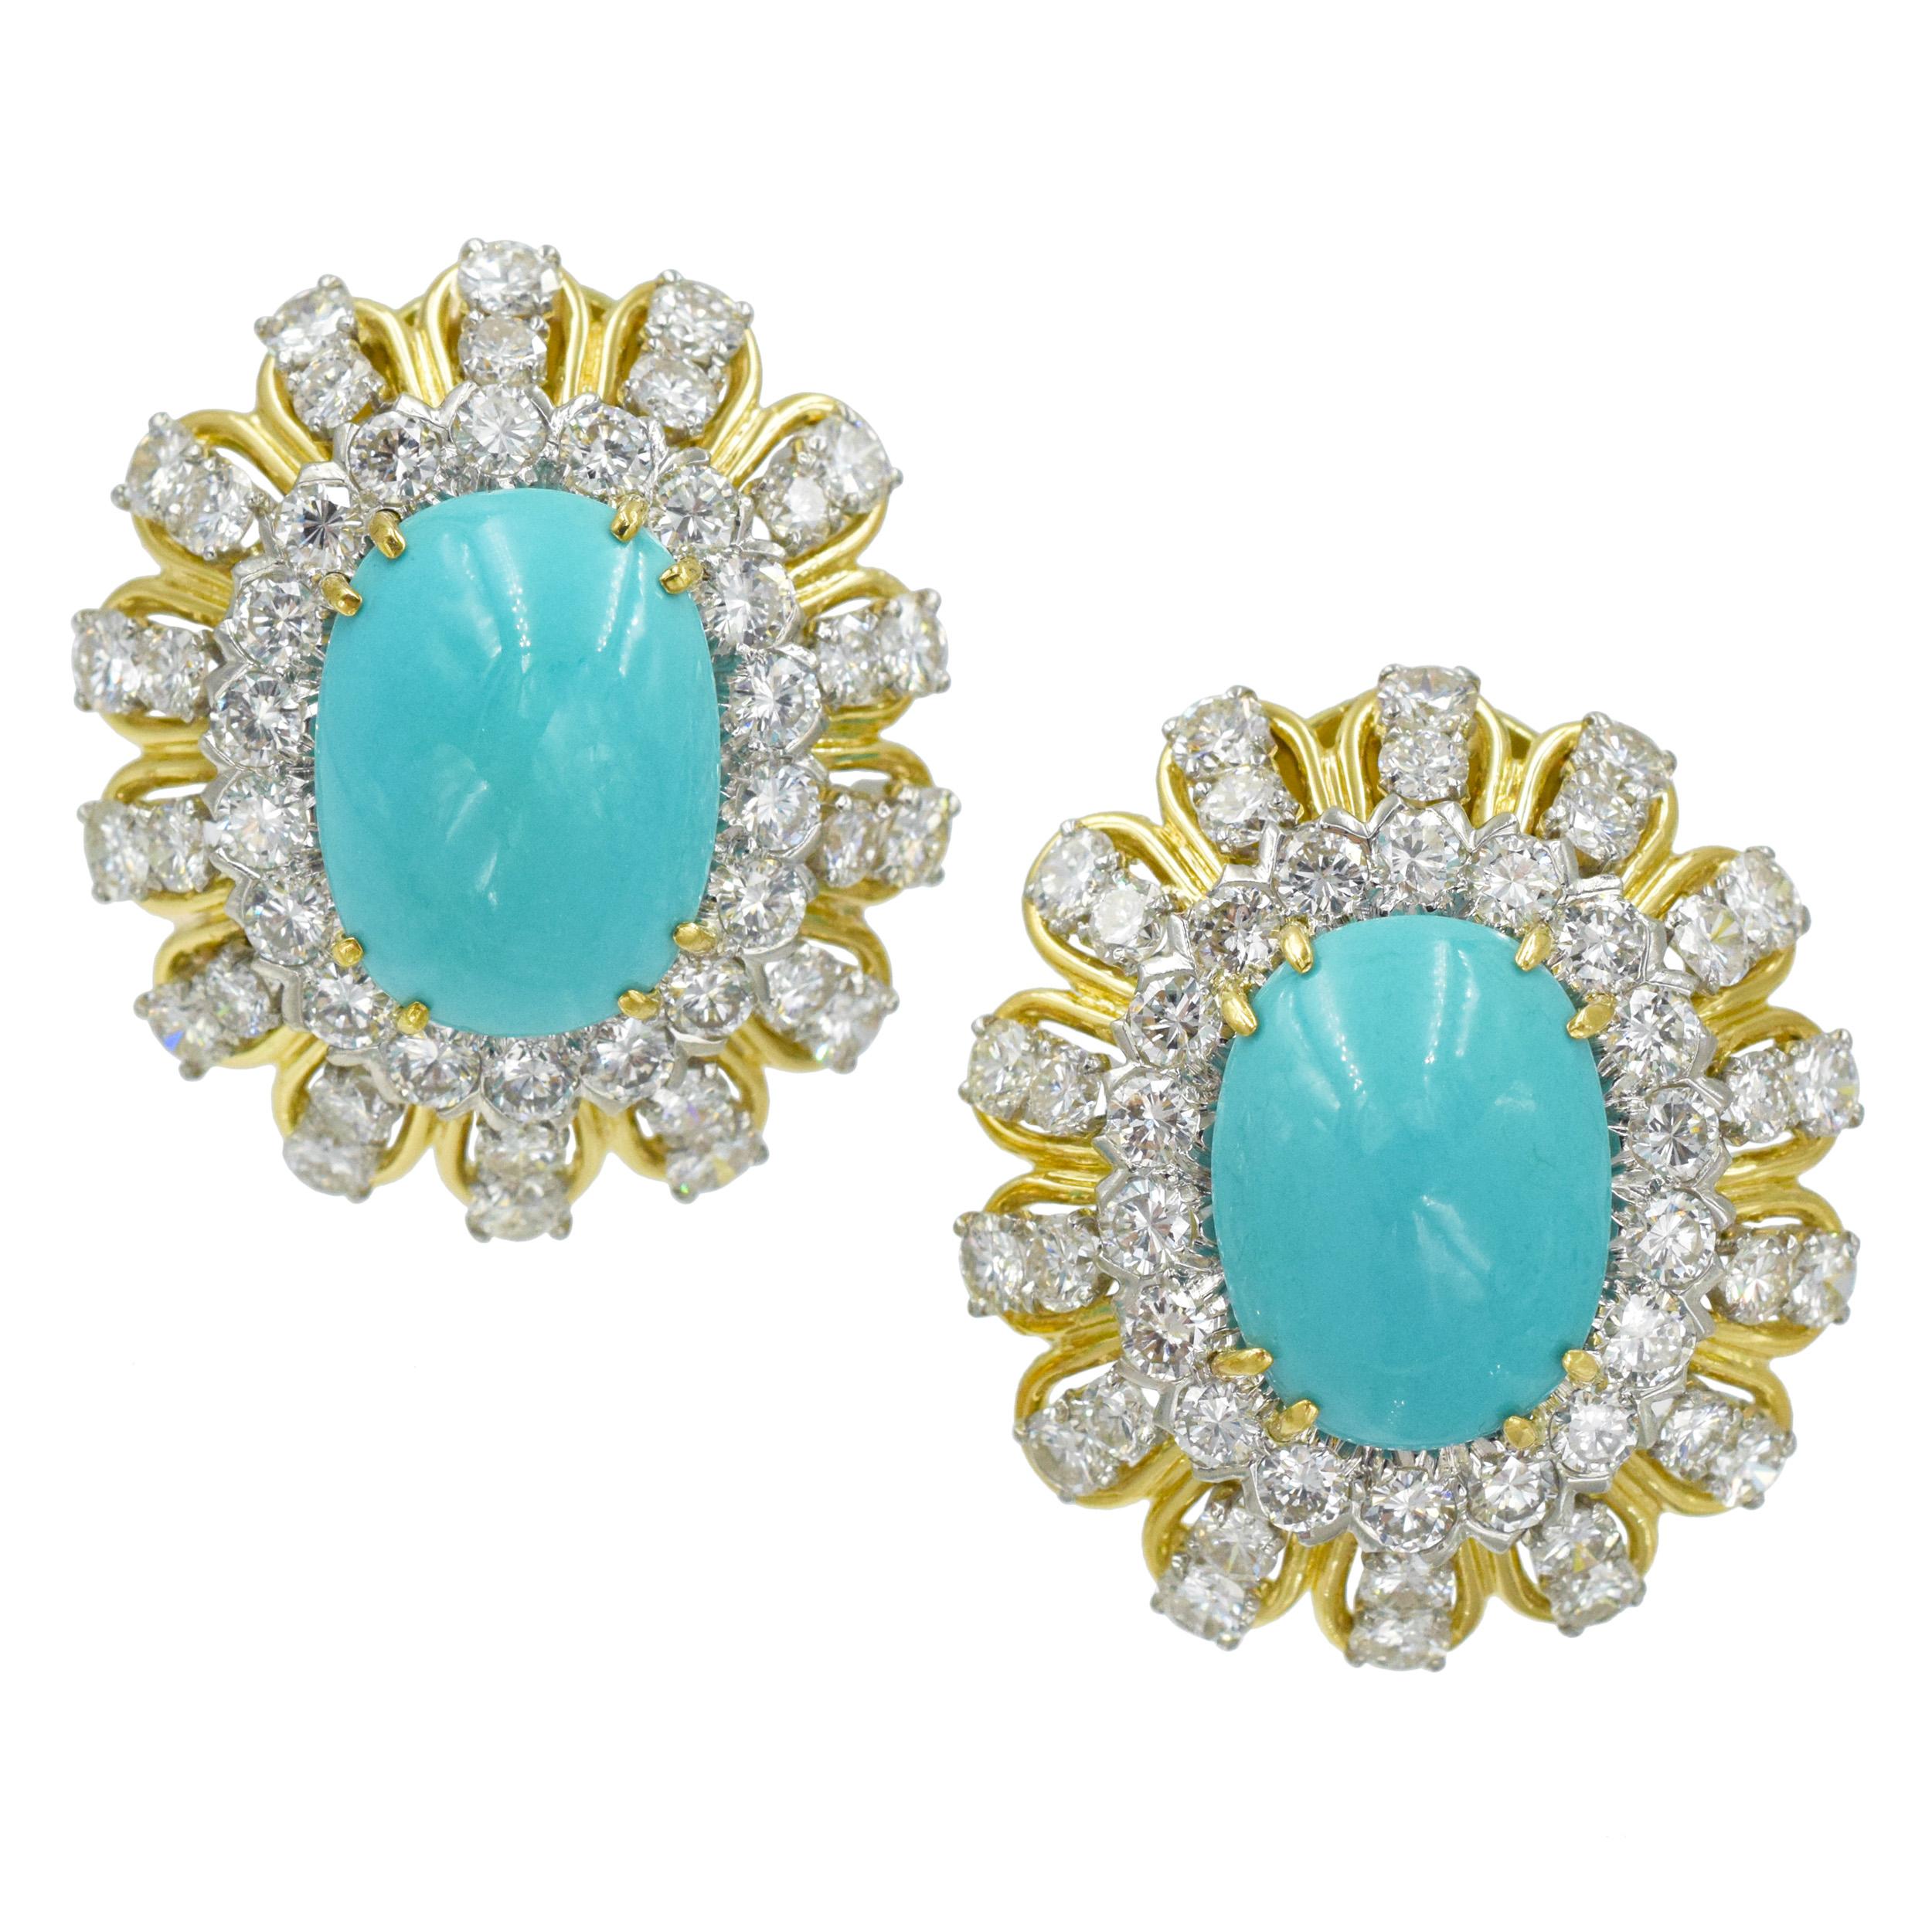 David Webb Turquoise and Diamond Earrings
This stunning pair of earrings has 2 cabochon turquoises flanked by 92 brilliant cut diamonds weighing a
total of approximately 7.90ct. Set in 18k yellow gold and platinum. 
The back of the earrings have an